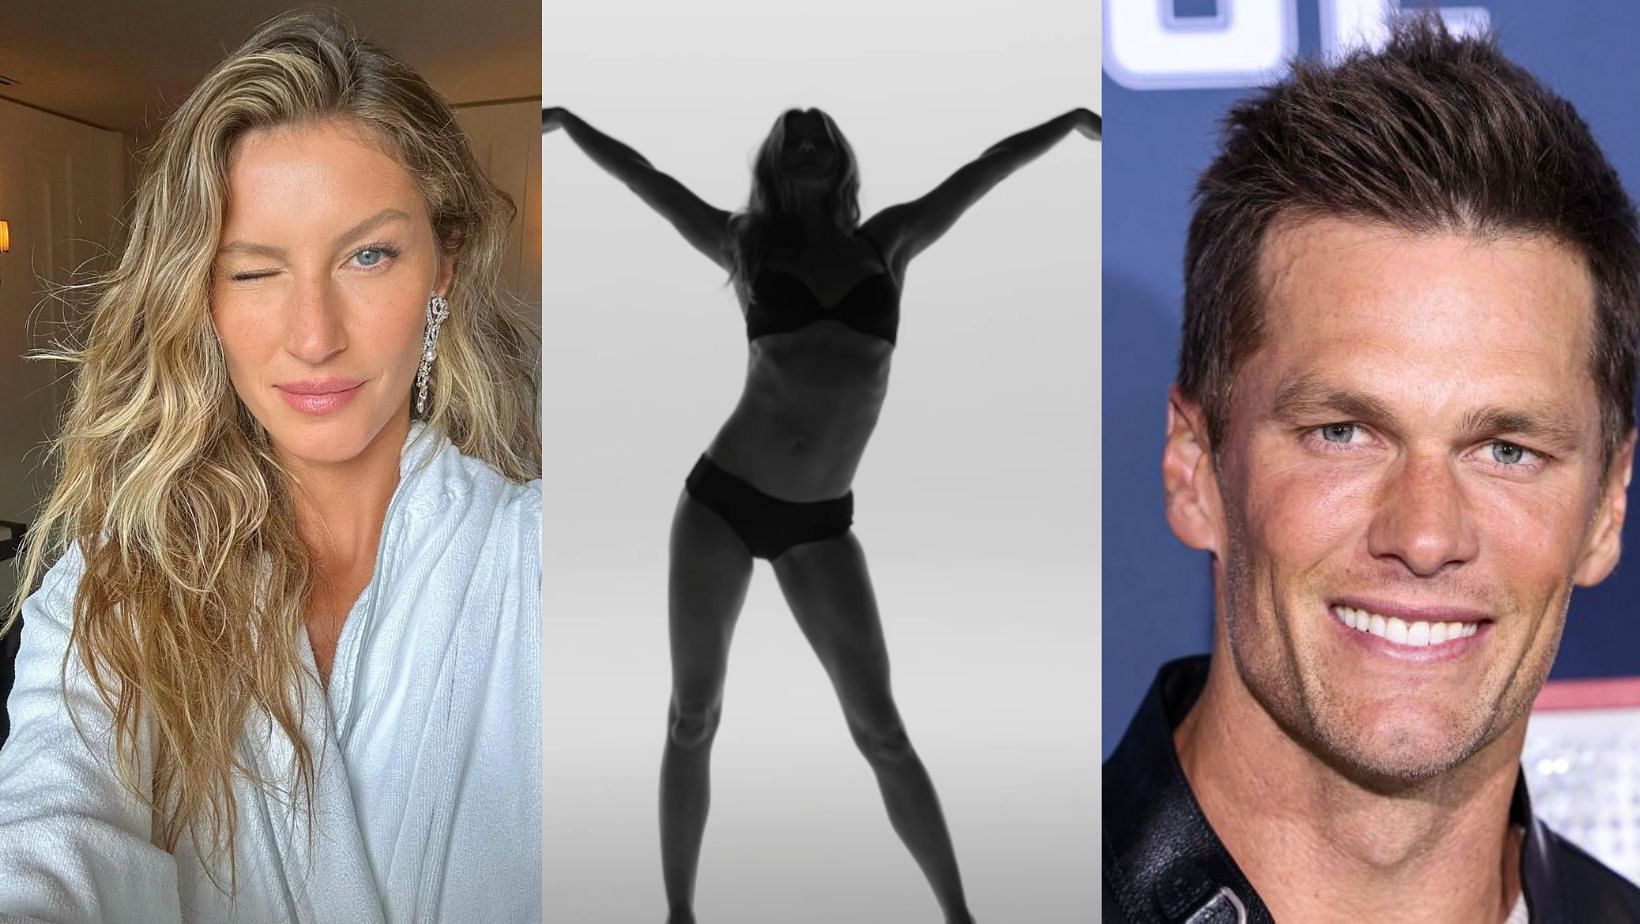 Gisele Bundchen has returned to the stage in full style